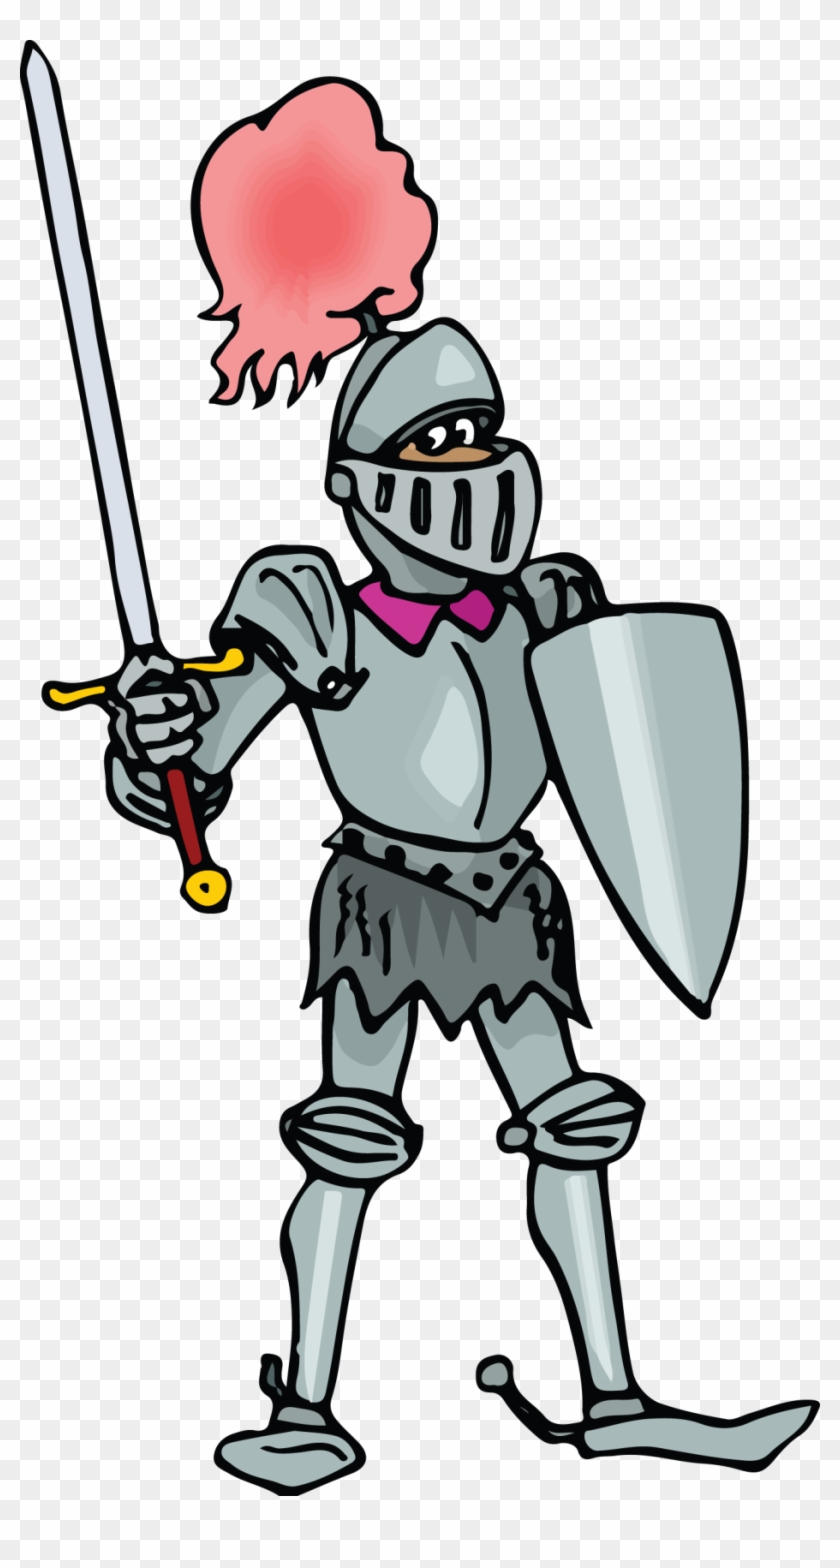 Knight middle ages.